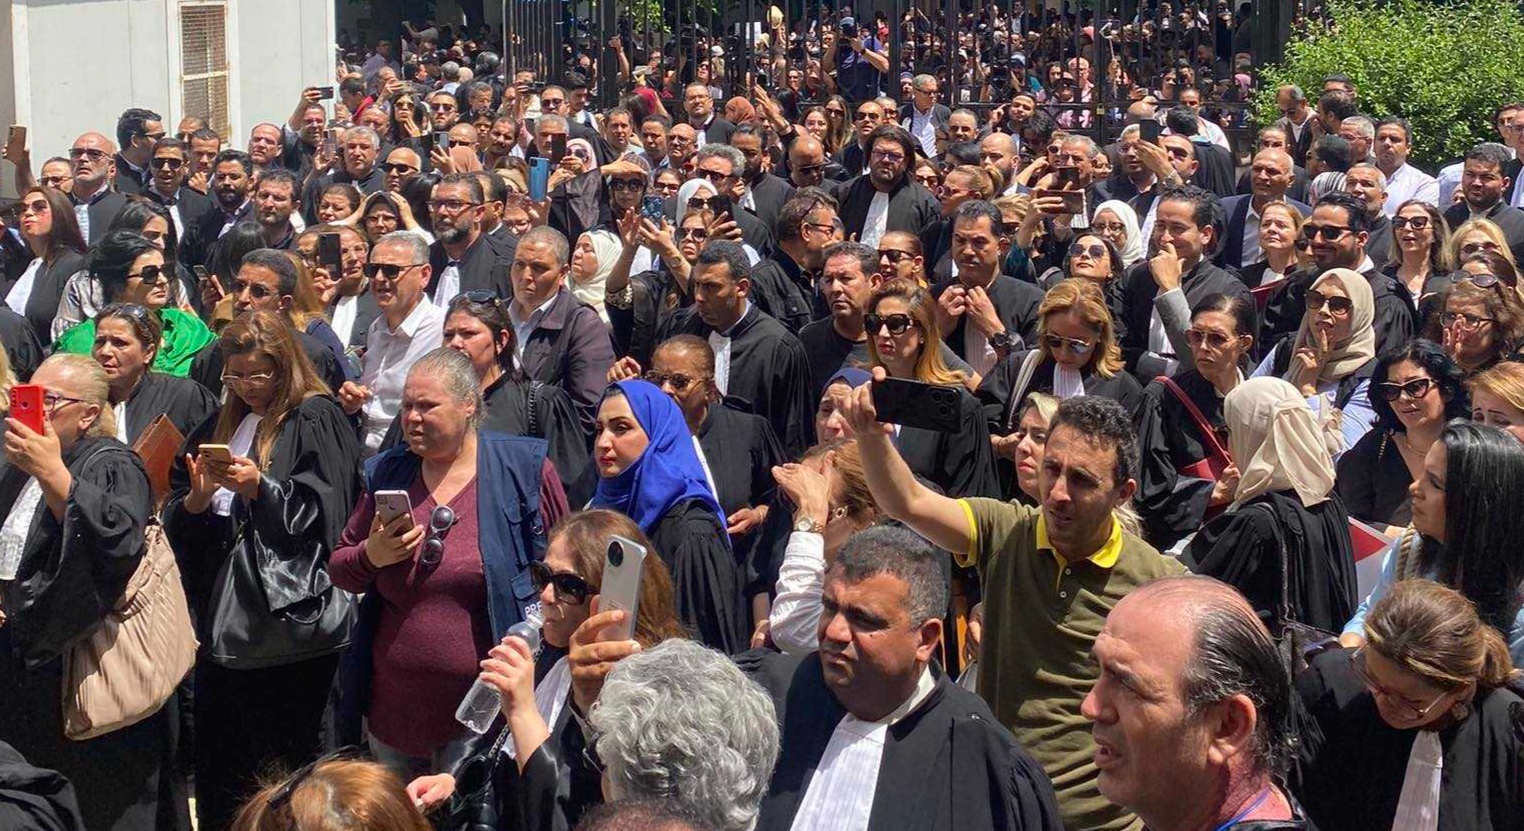 Tunisia dispatch: striking Tunisian lawyers rally against government overreach